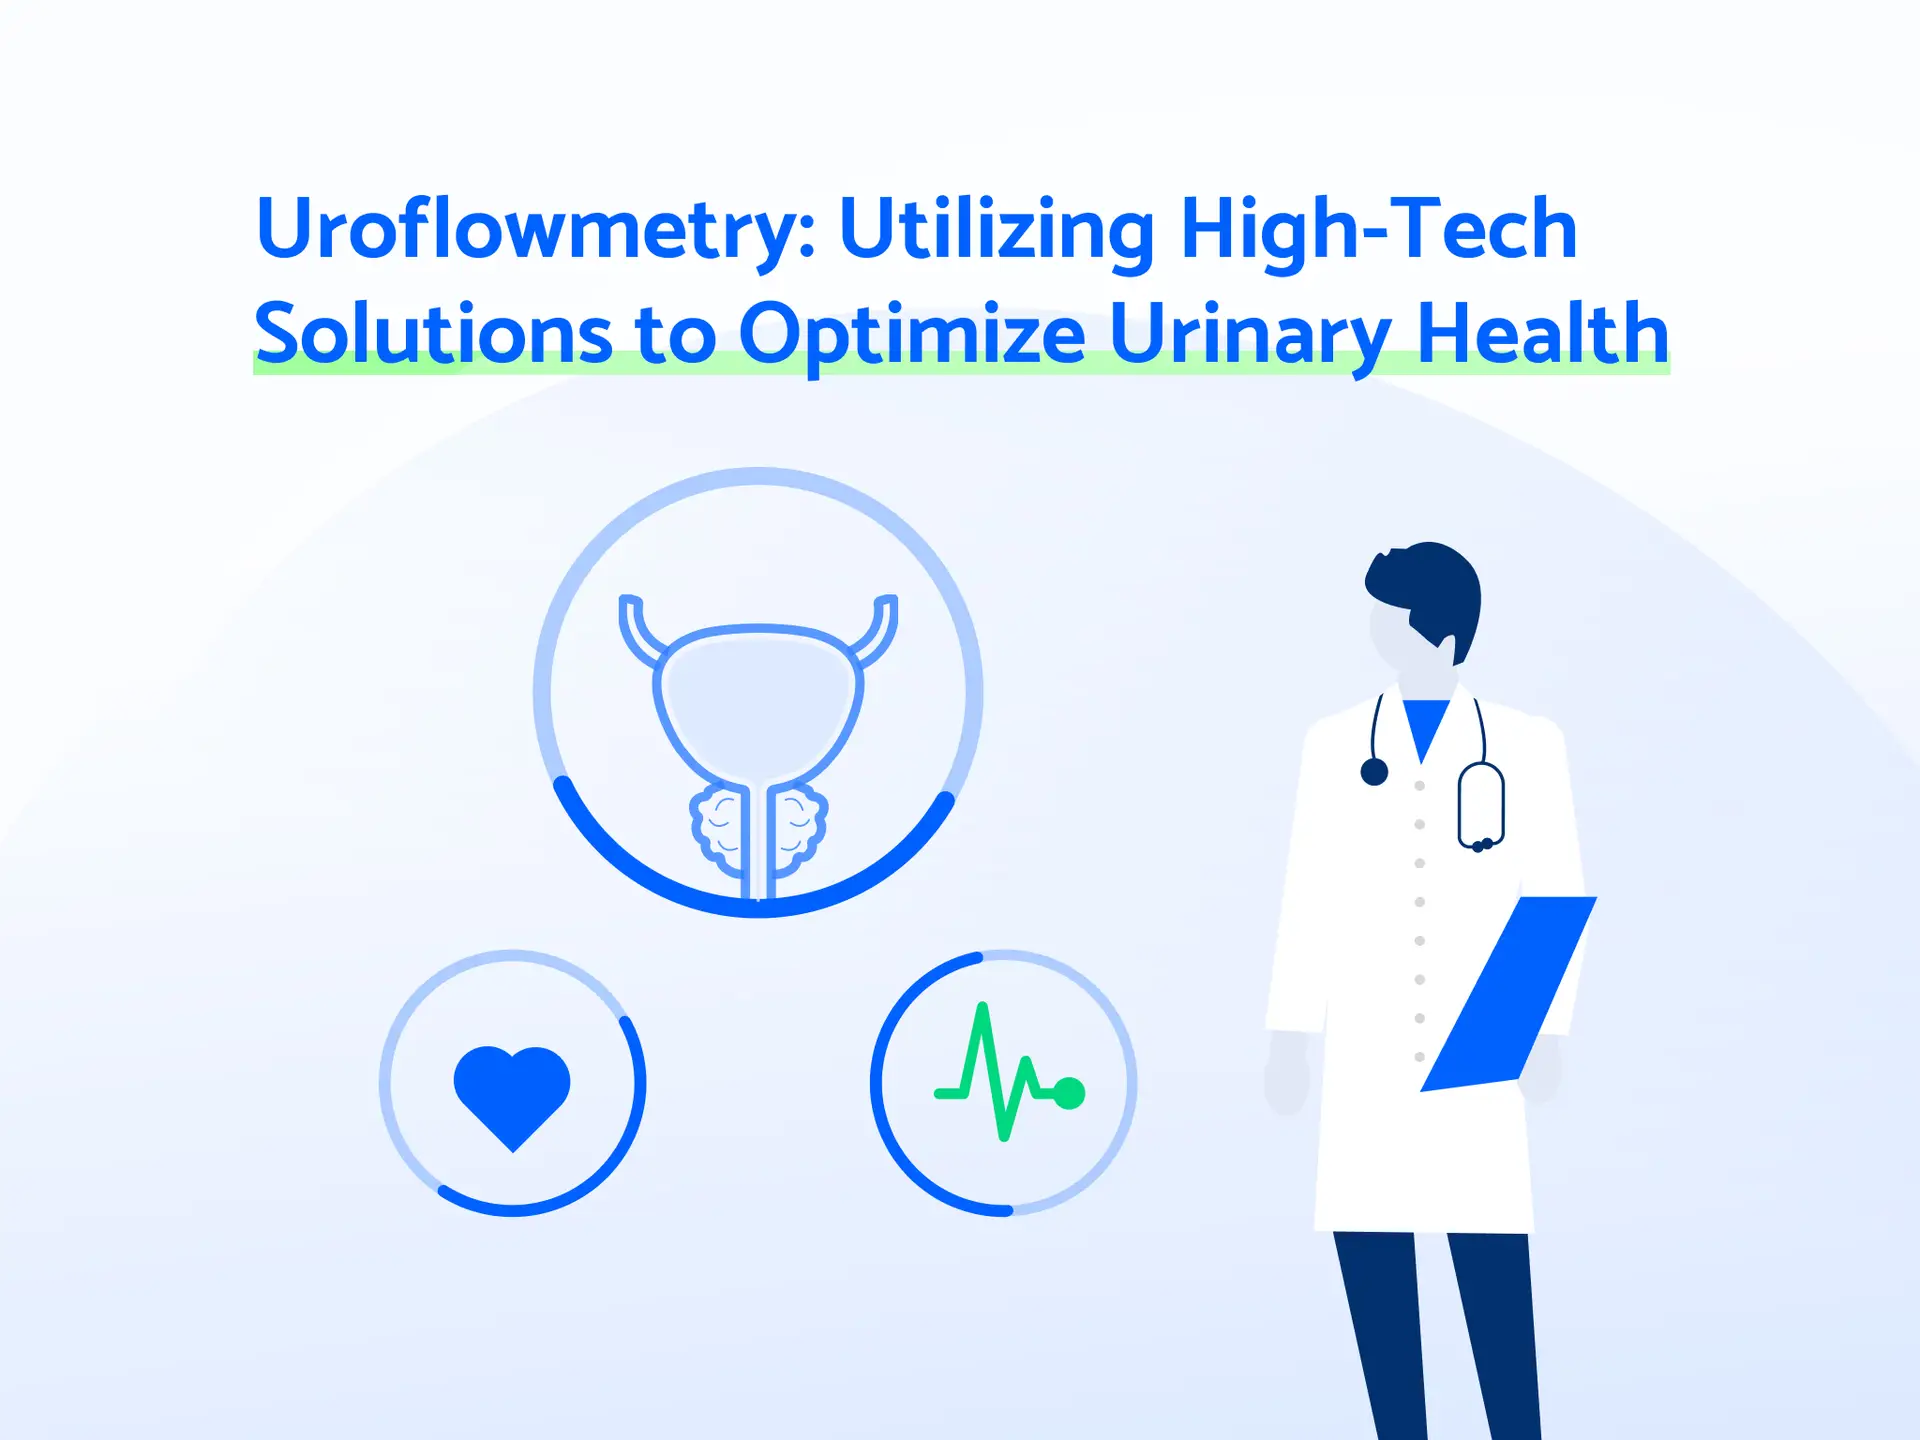 Discover how uroflowmetry machines, like the Oruba Oruflow, enhance bladder health by measuring urine flow rates. Learn about their key features and role in urological diagnosis